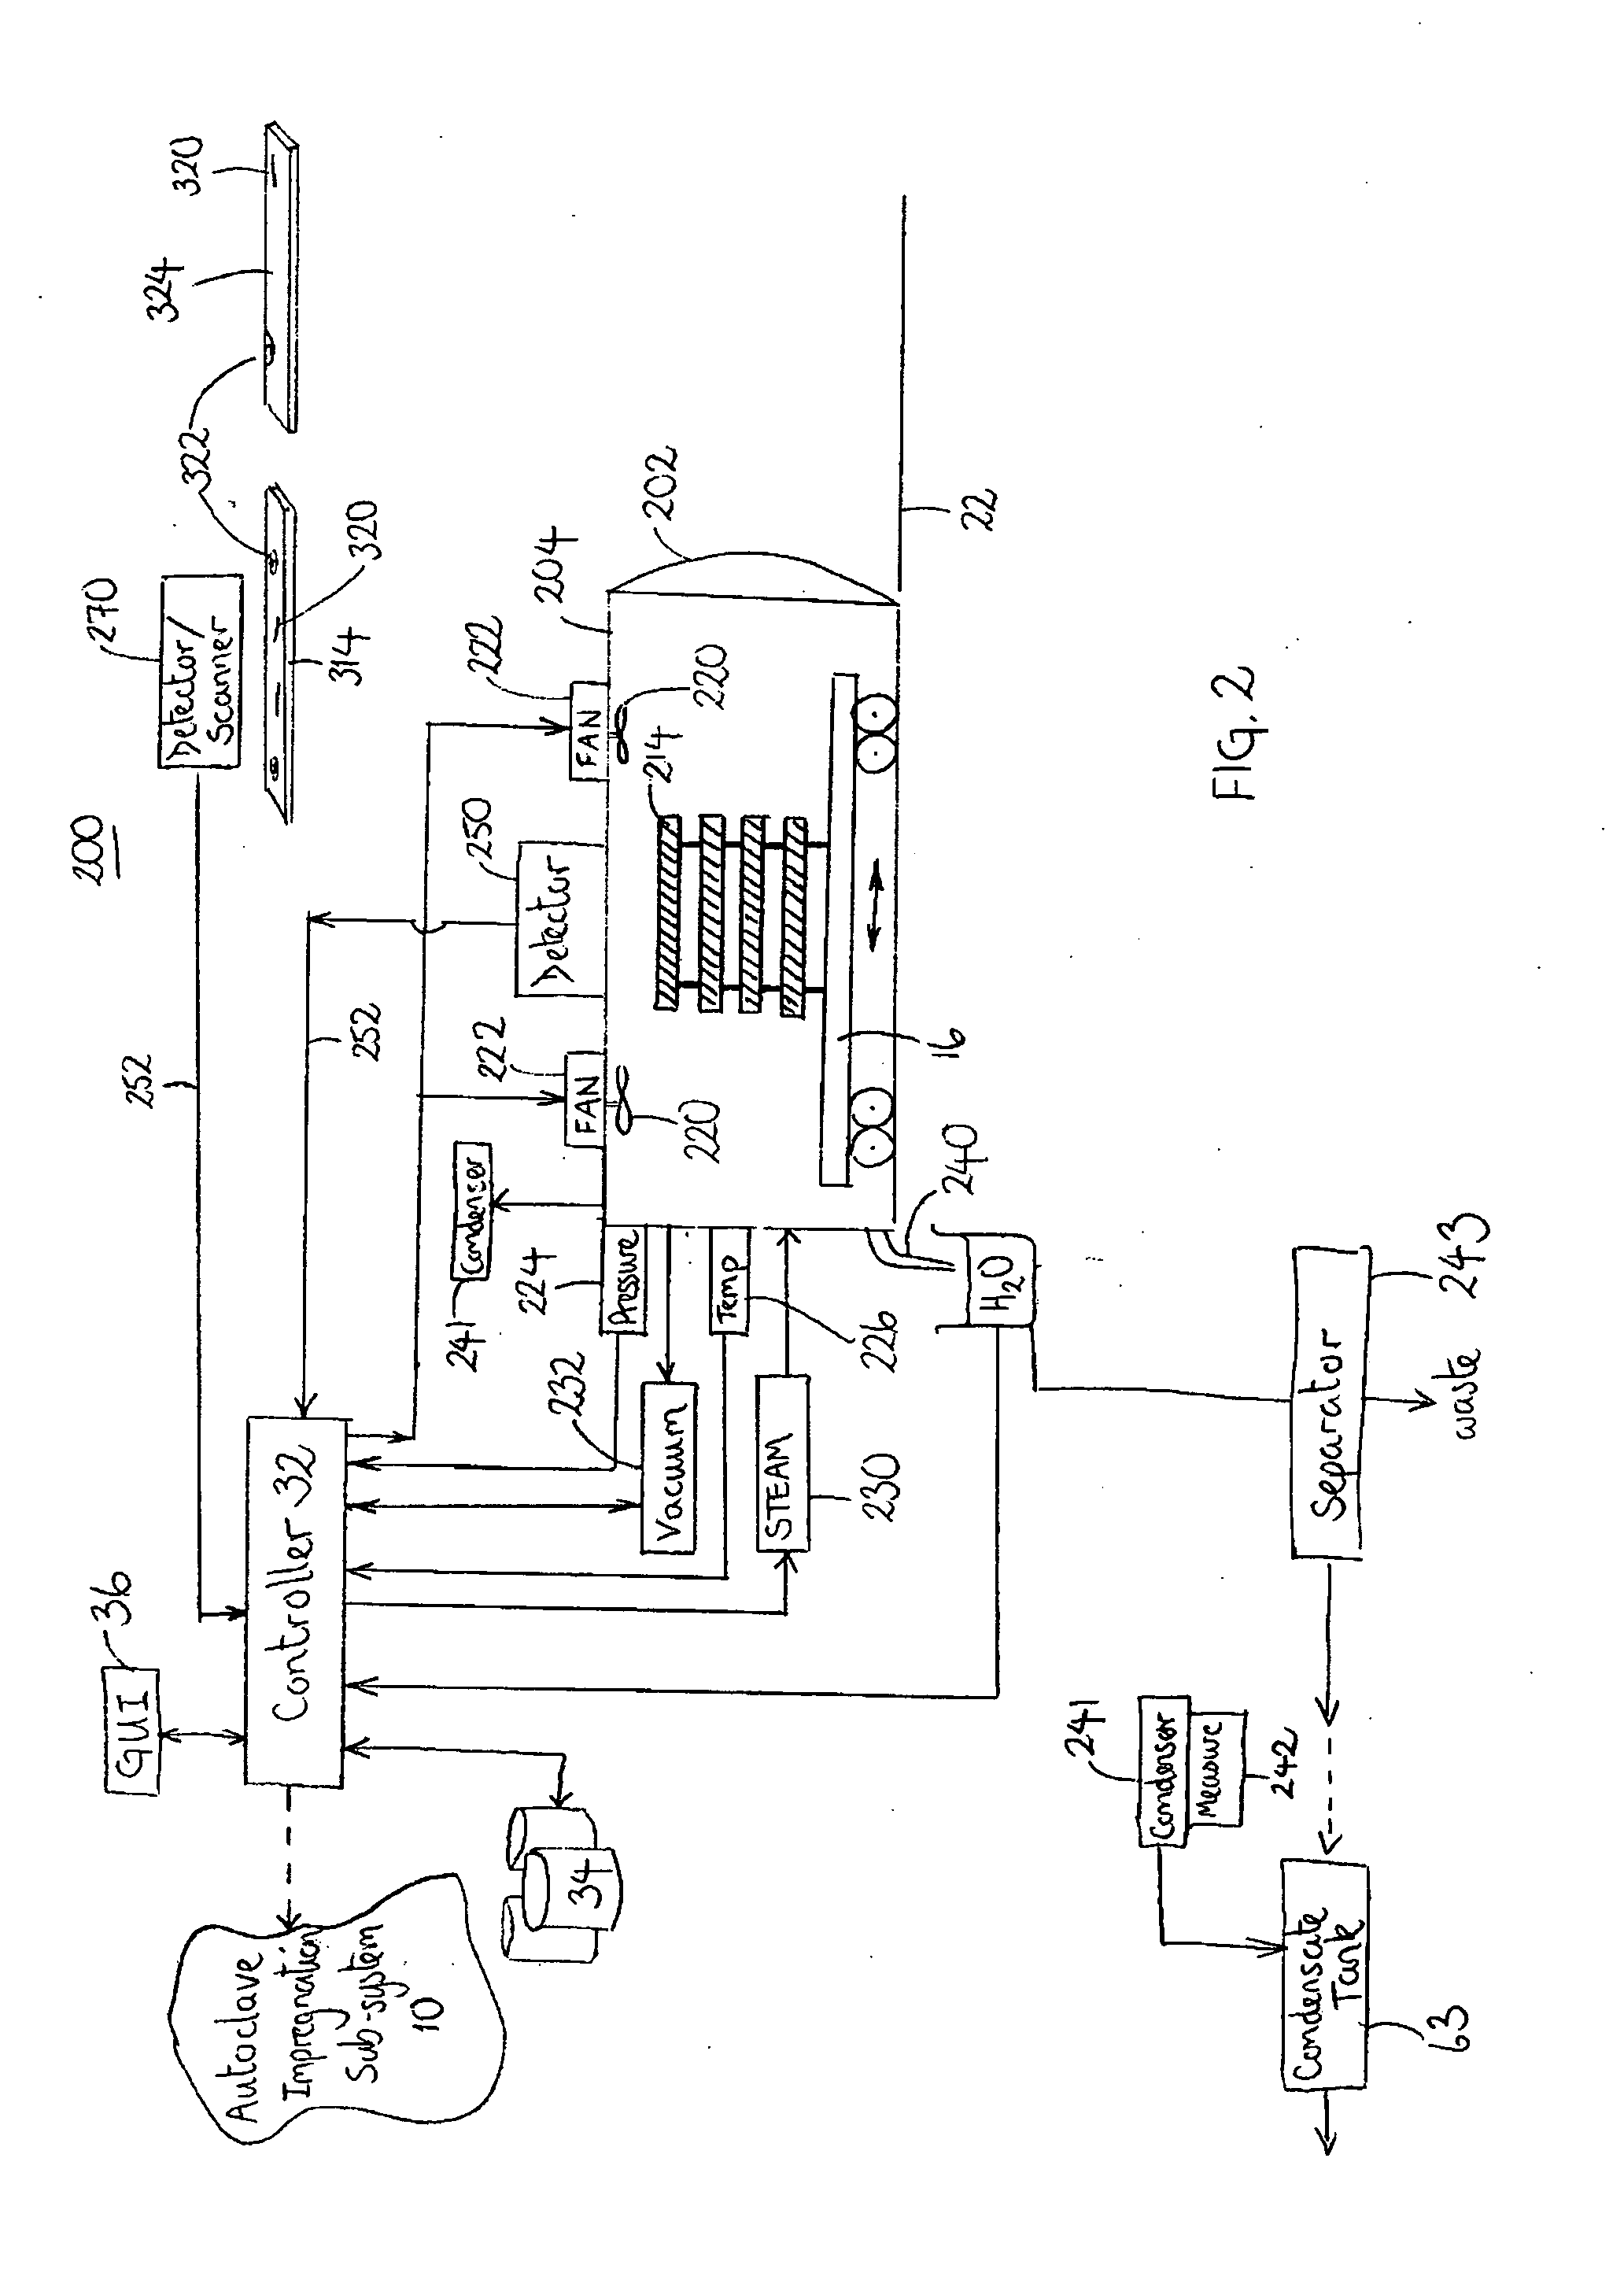 Apparatus and Operating Systems for Manufacturing Impregnated Wood